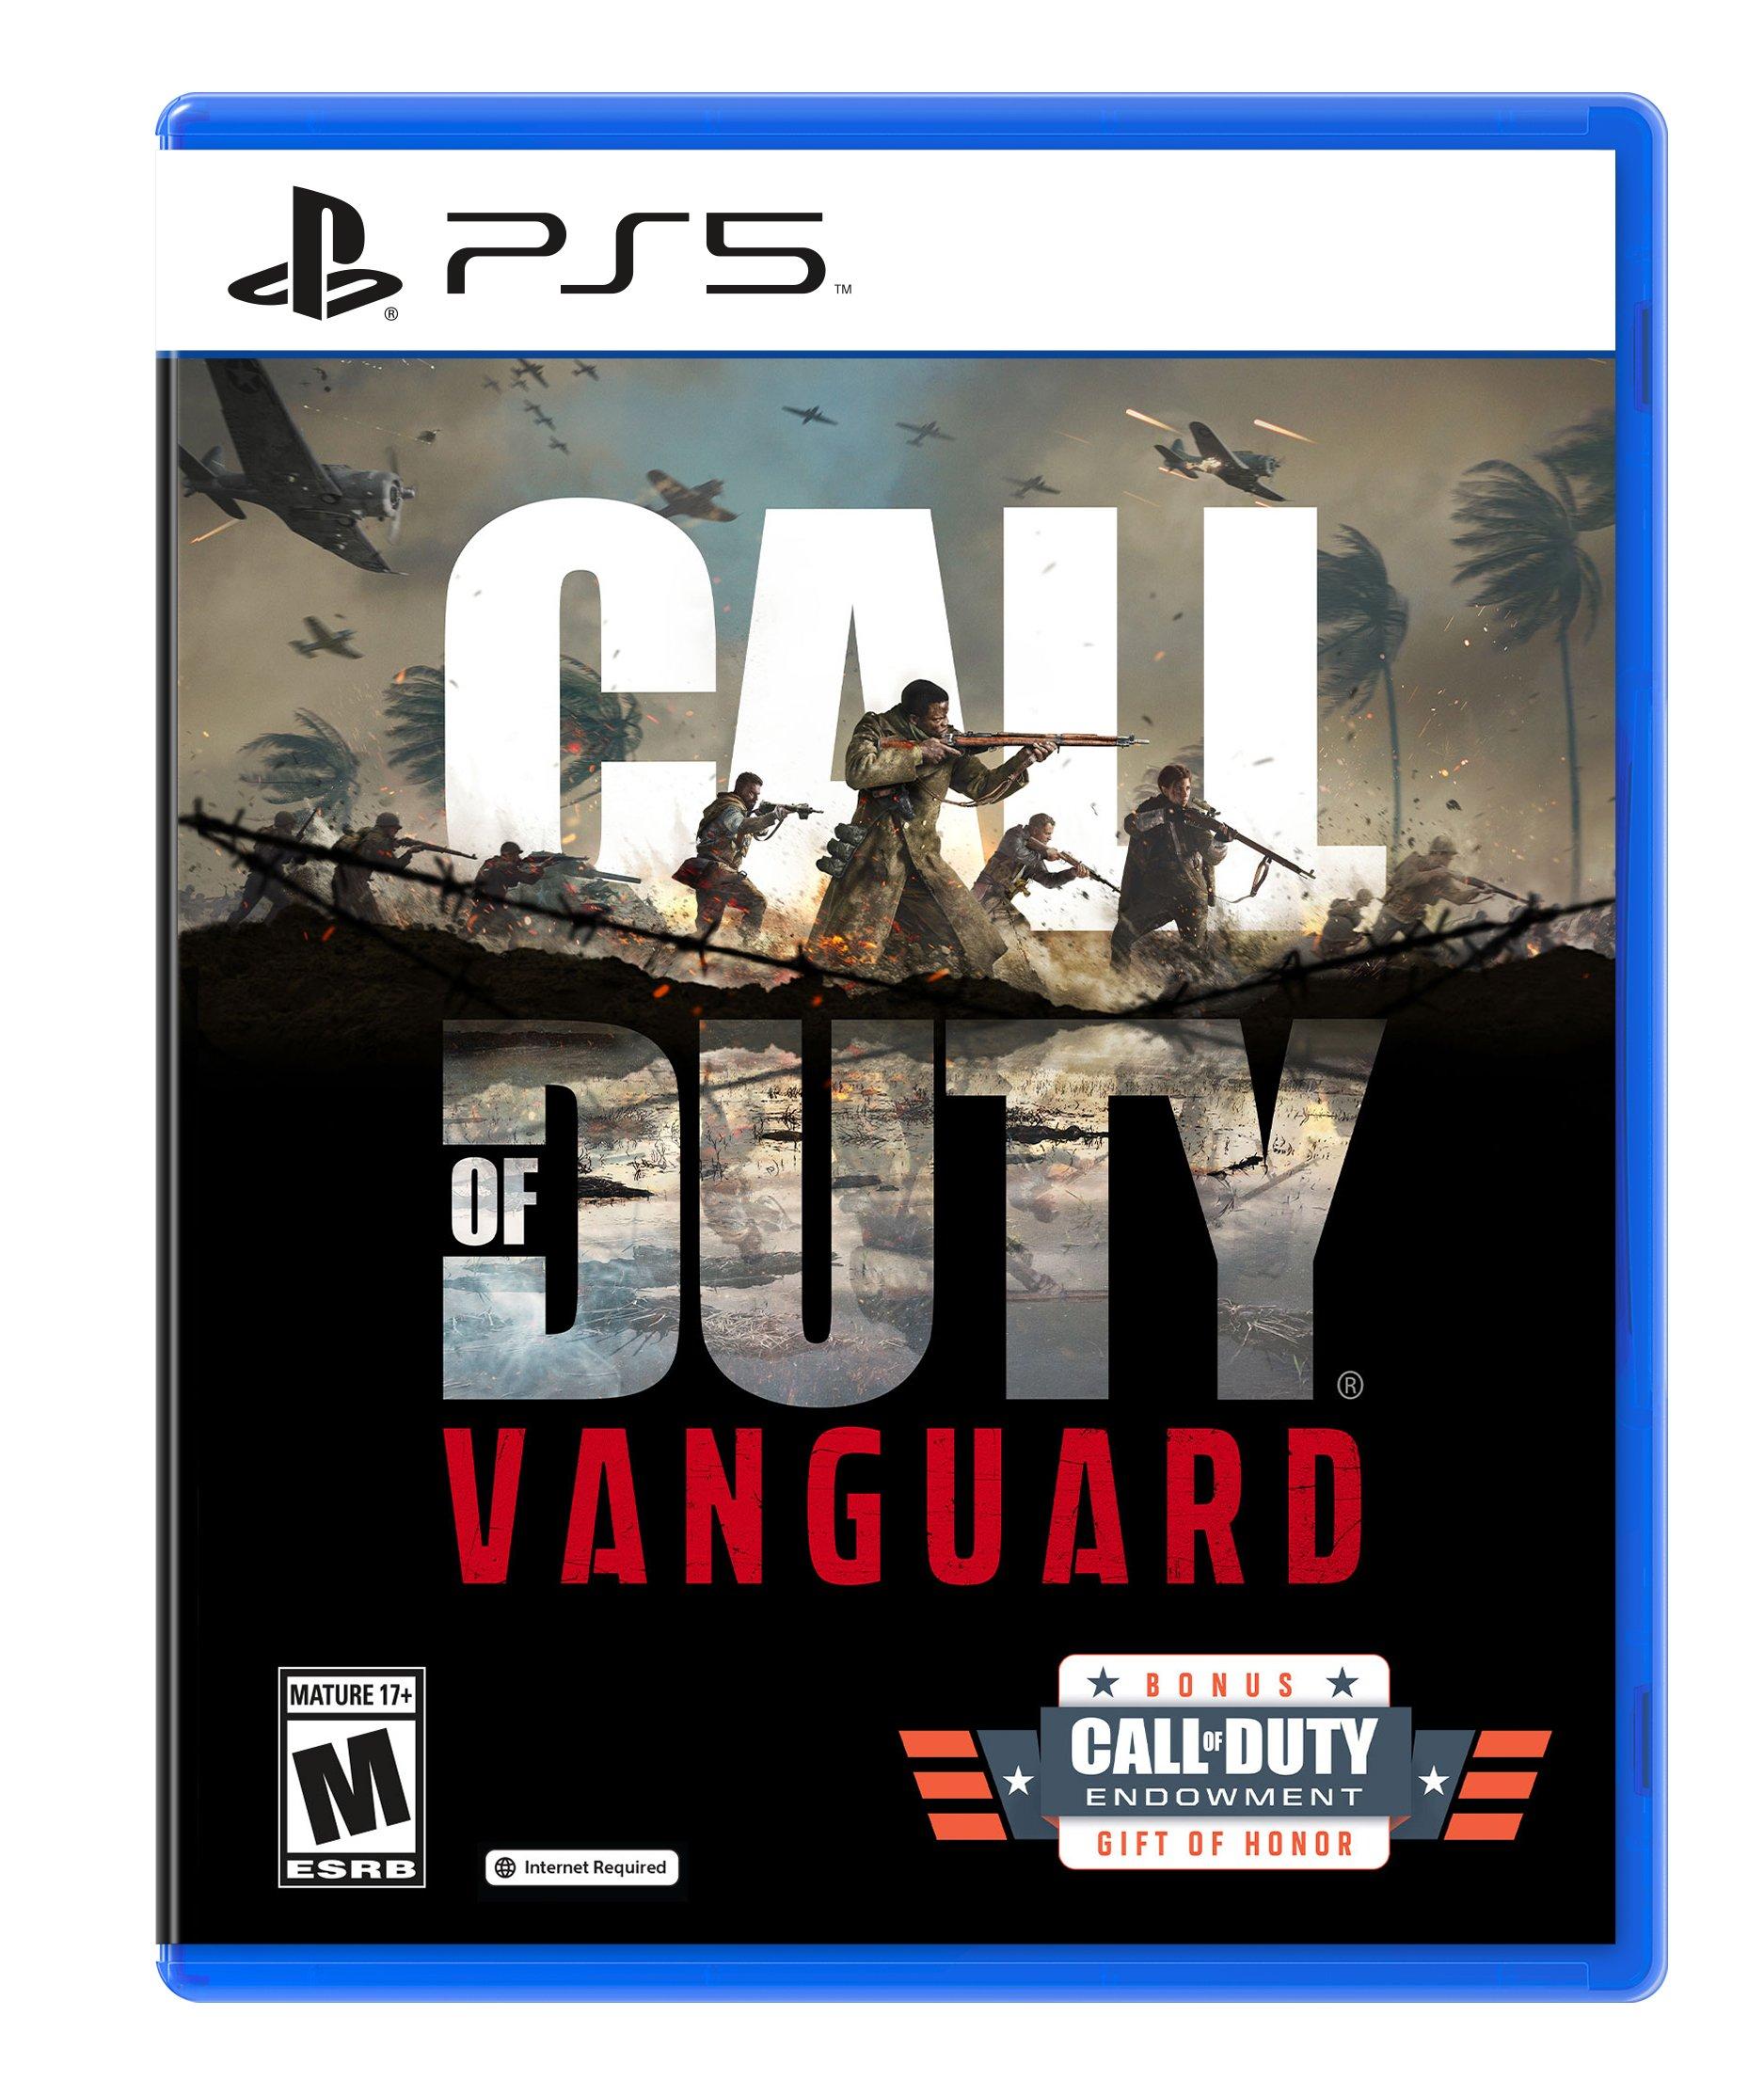 [YMMV] Call of Duty: Vanguard (PS5) $10 / Black Ops: Cold War (Xbox One / Series X) $12.50 - after $5 Store Pickup Discount @ GameStop *Availability May Vary*